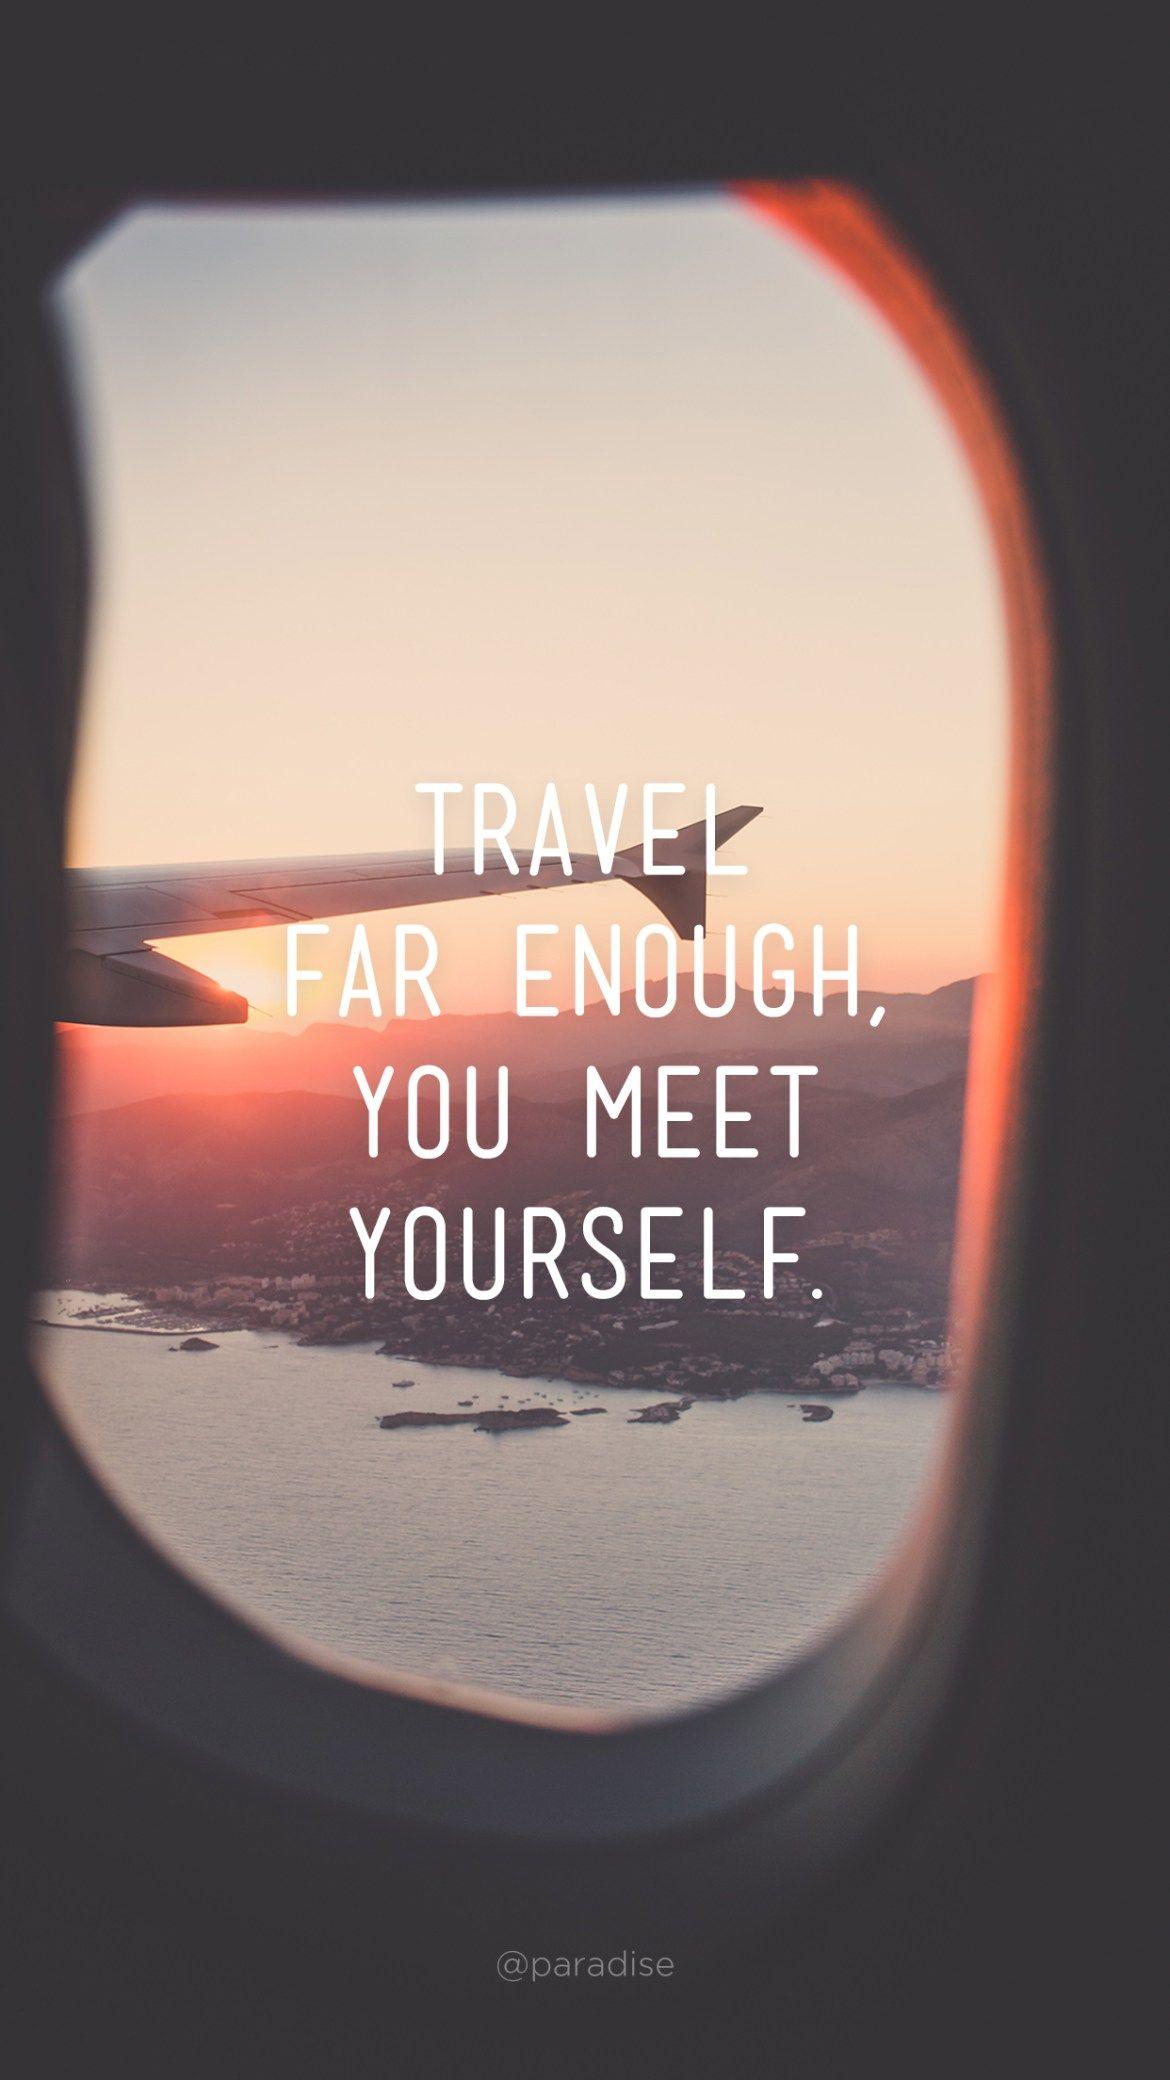 Beautiful iPhone Wallpaper with Travel Quotes. Via Paradise. Travel quotes, Journey quotes, Phone wallpaper quotes